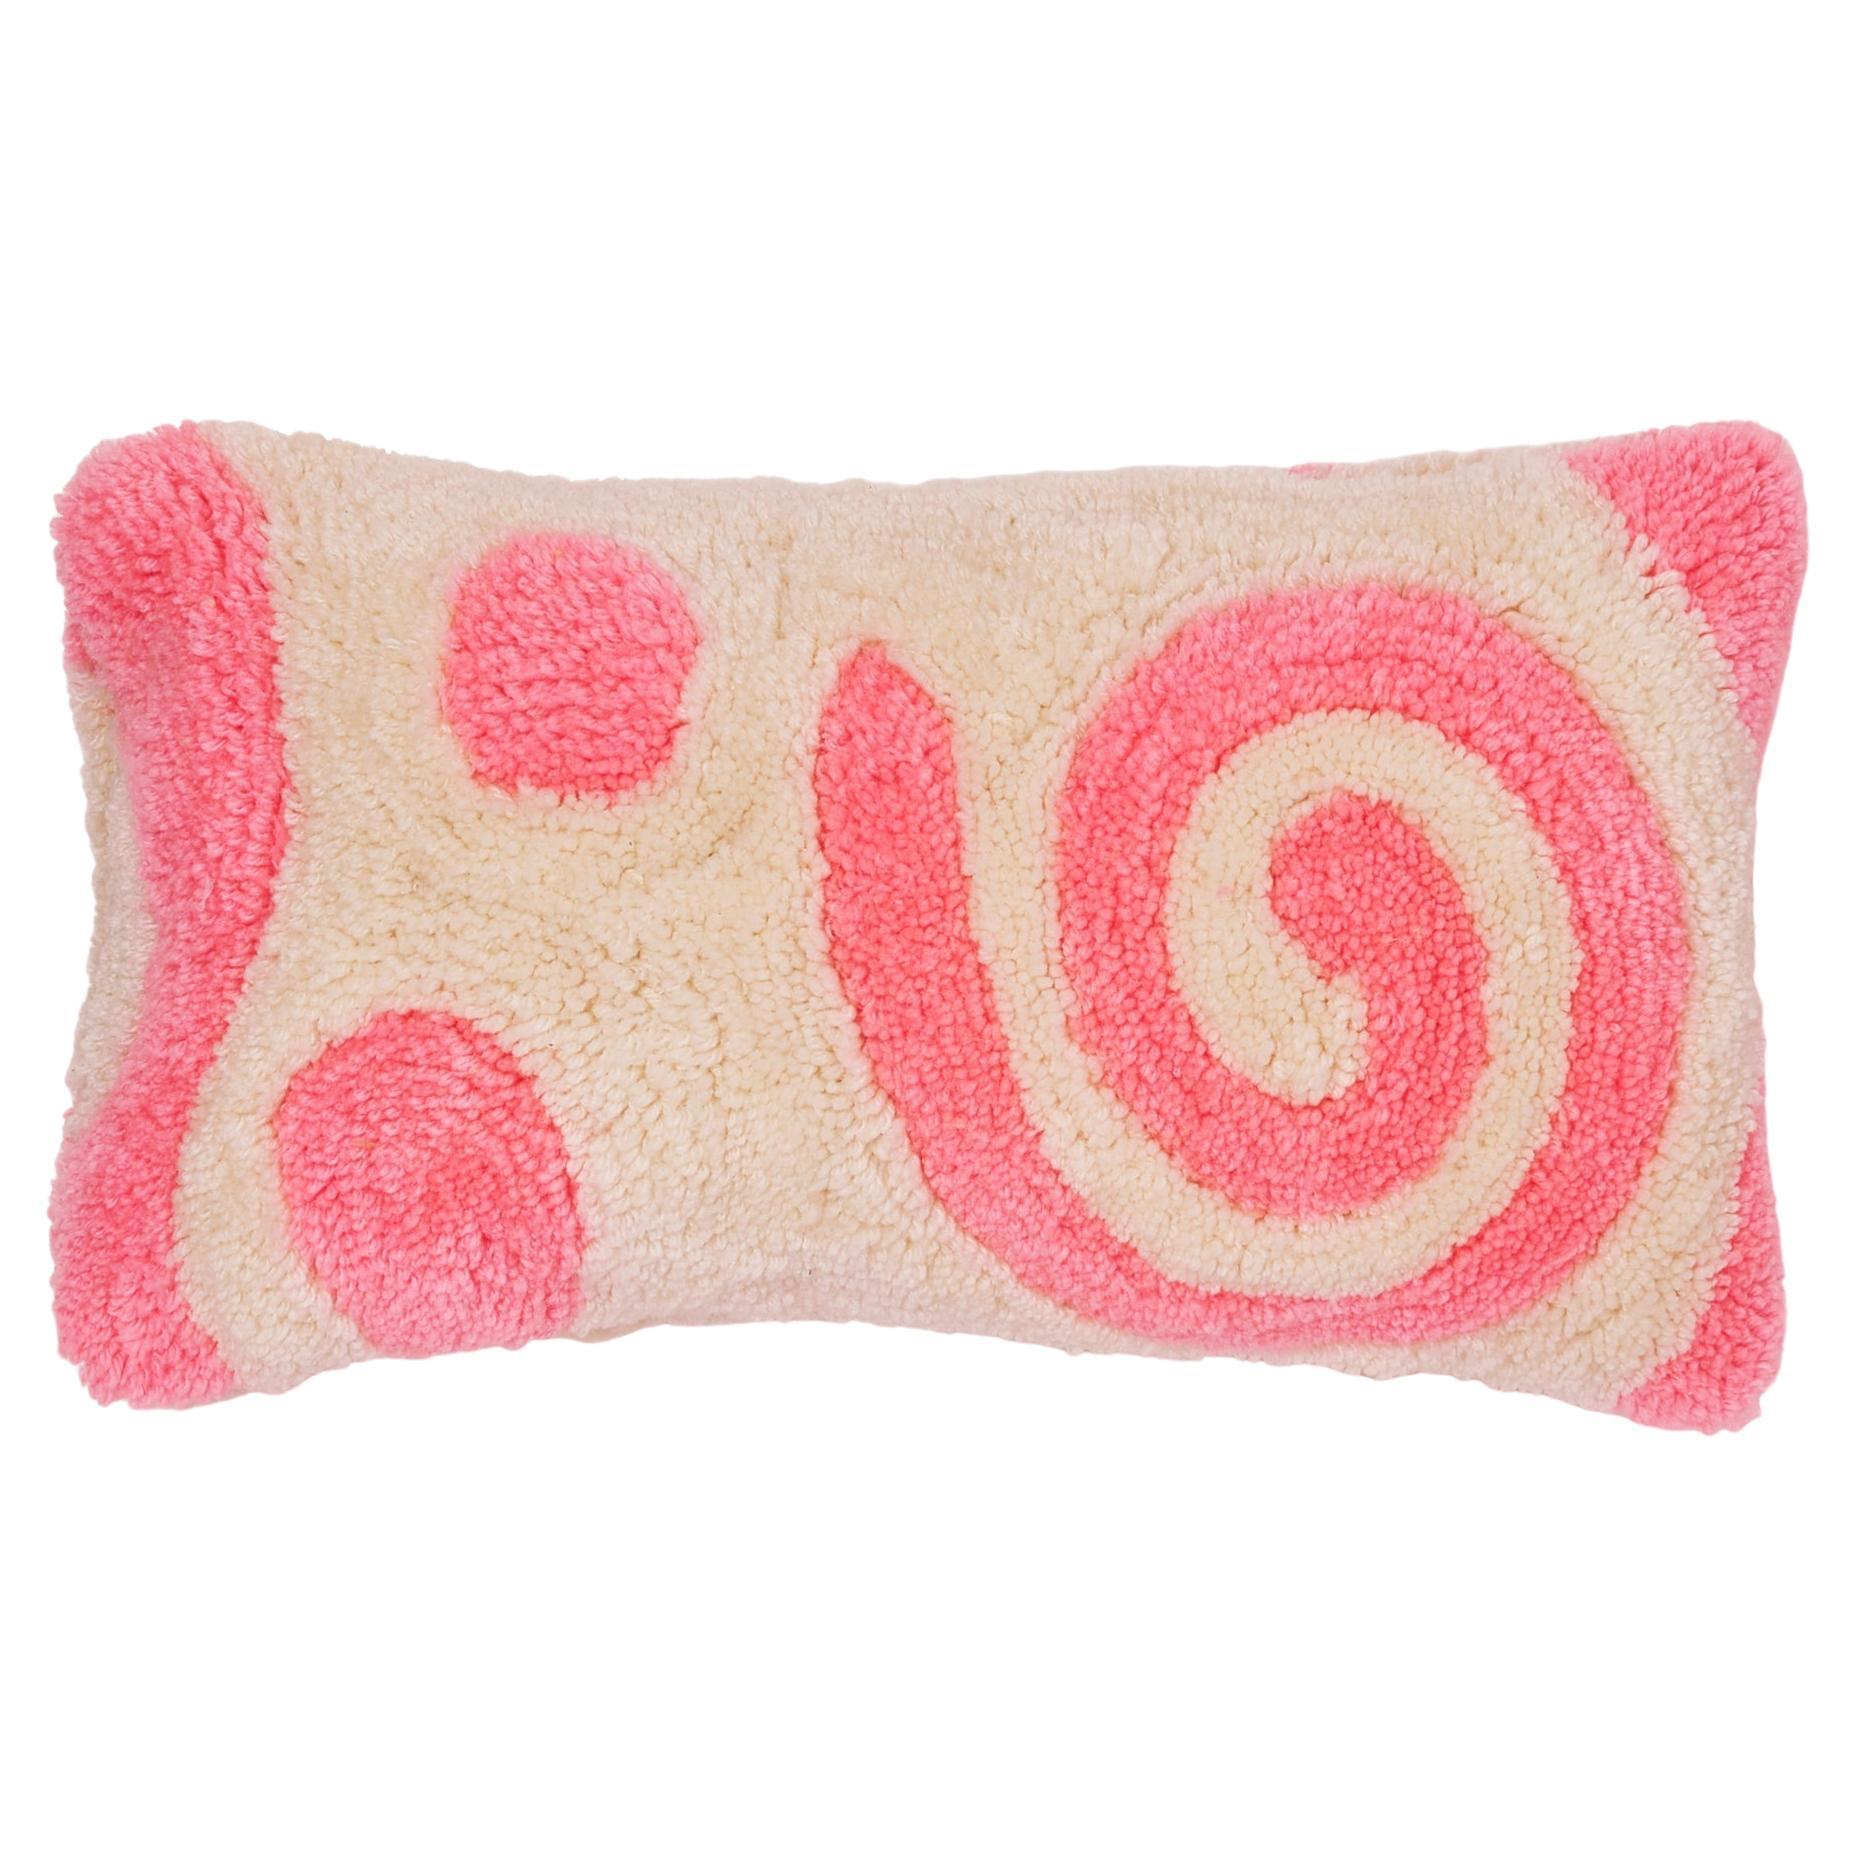 Pink and Cream Memphis Style Tufted Lumbar Pillow For Sale